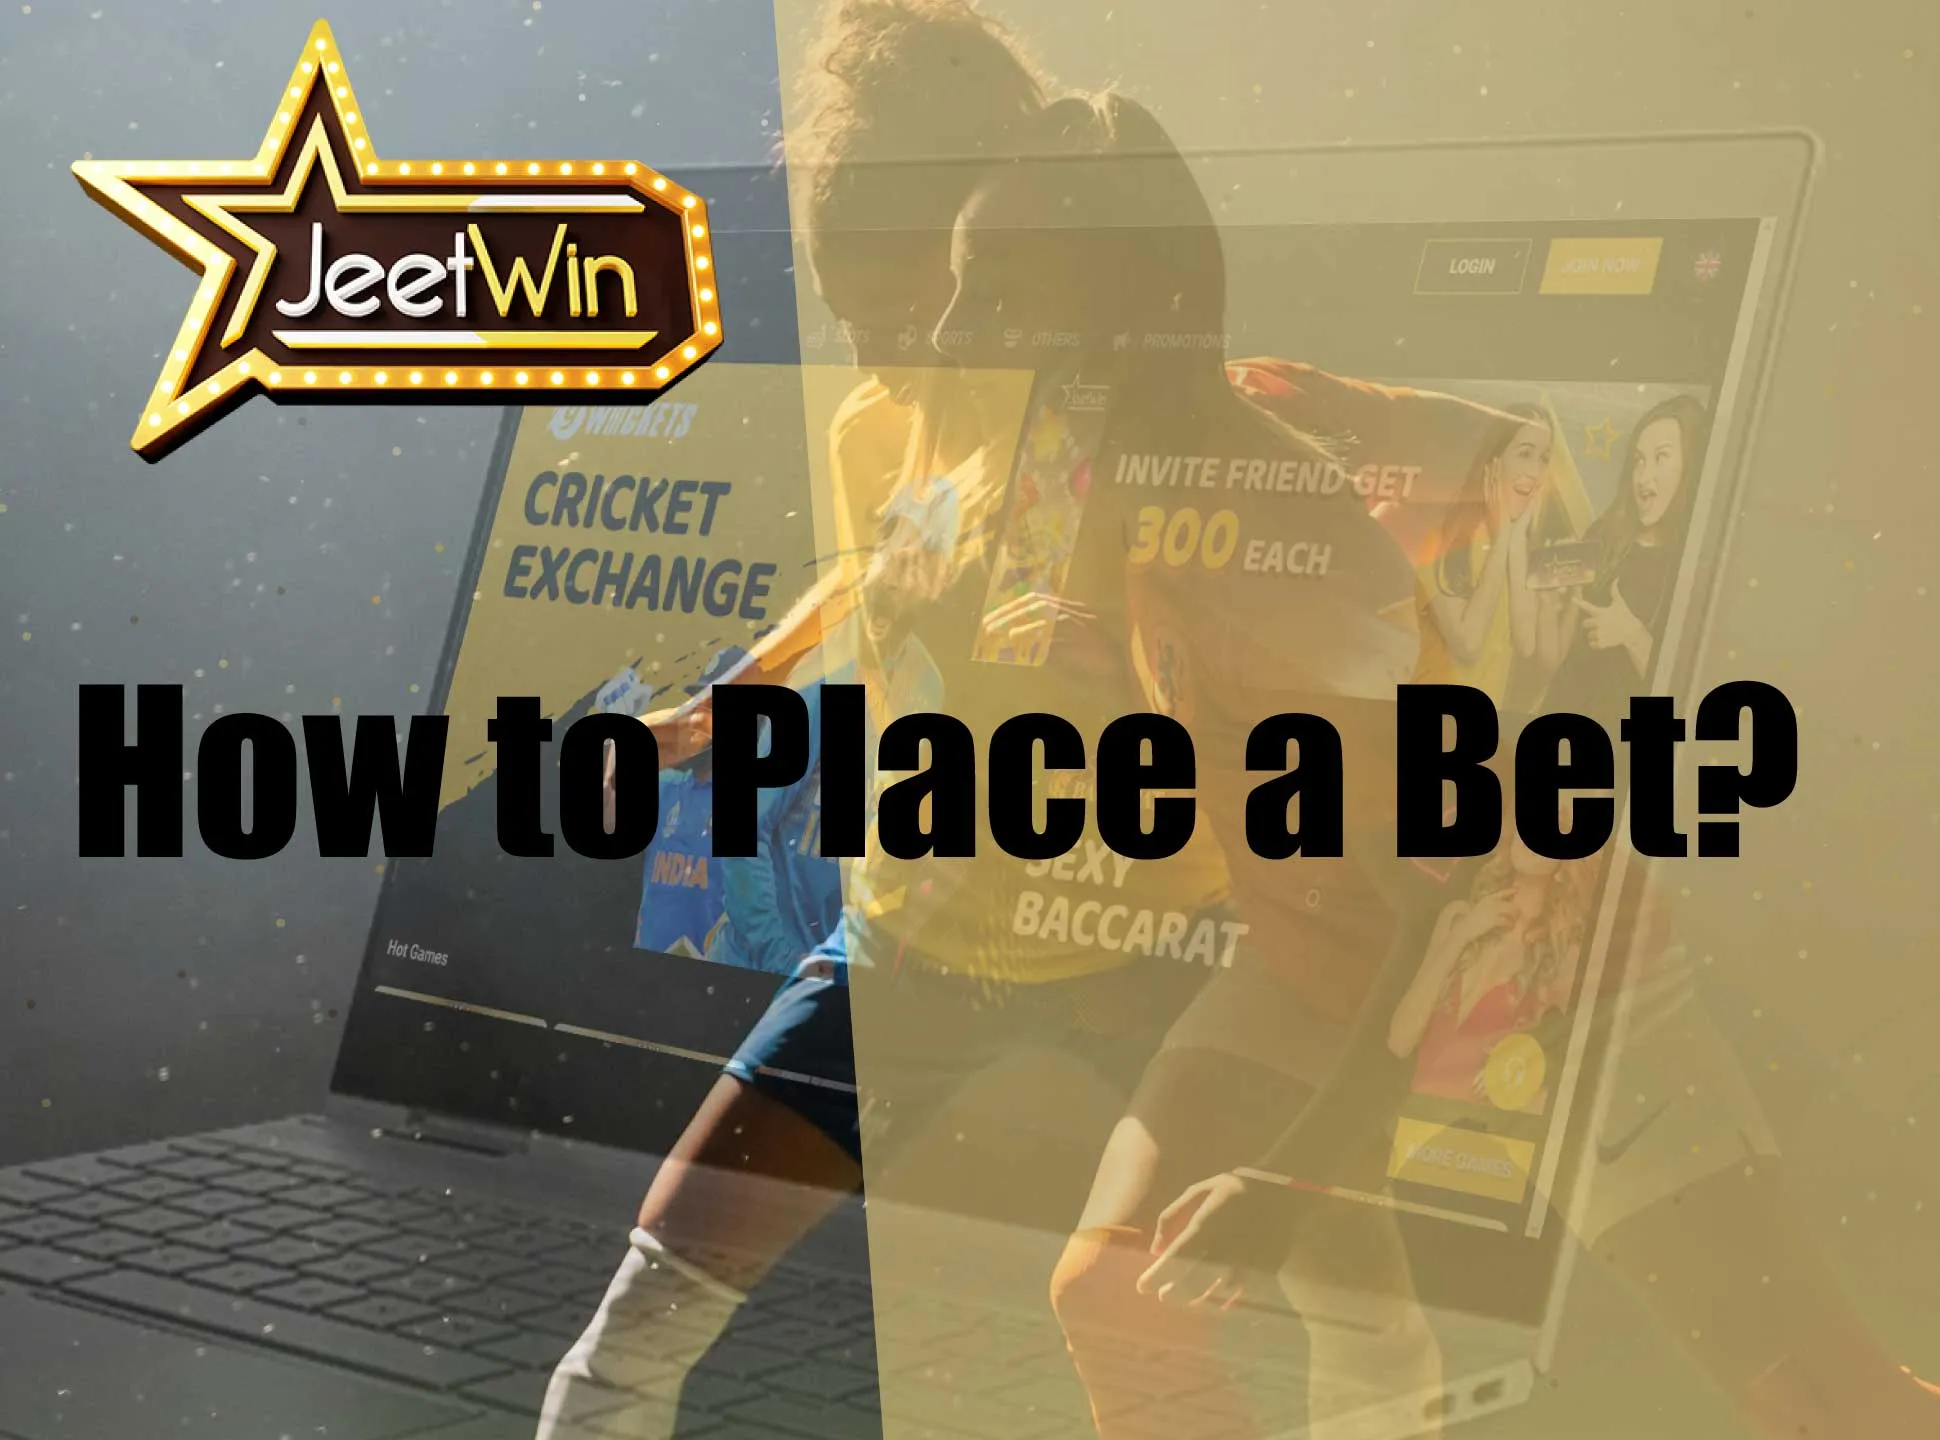 Here is a step-by-step guide to place e bet on Jeetwin.